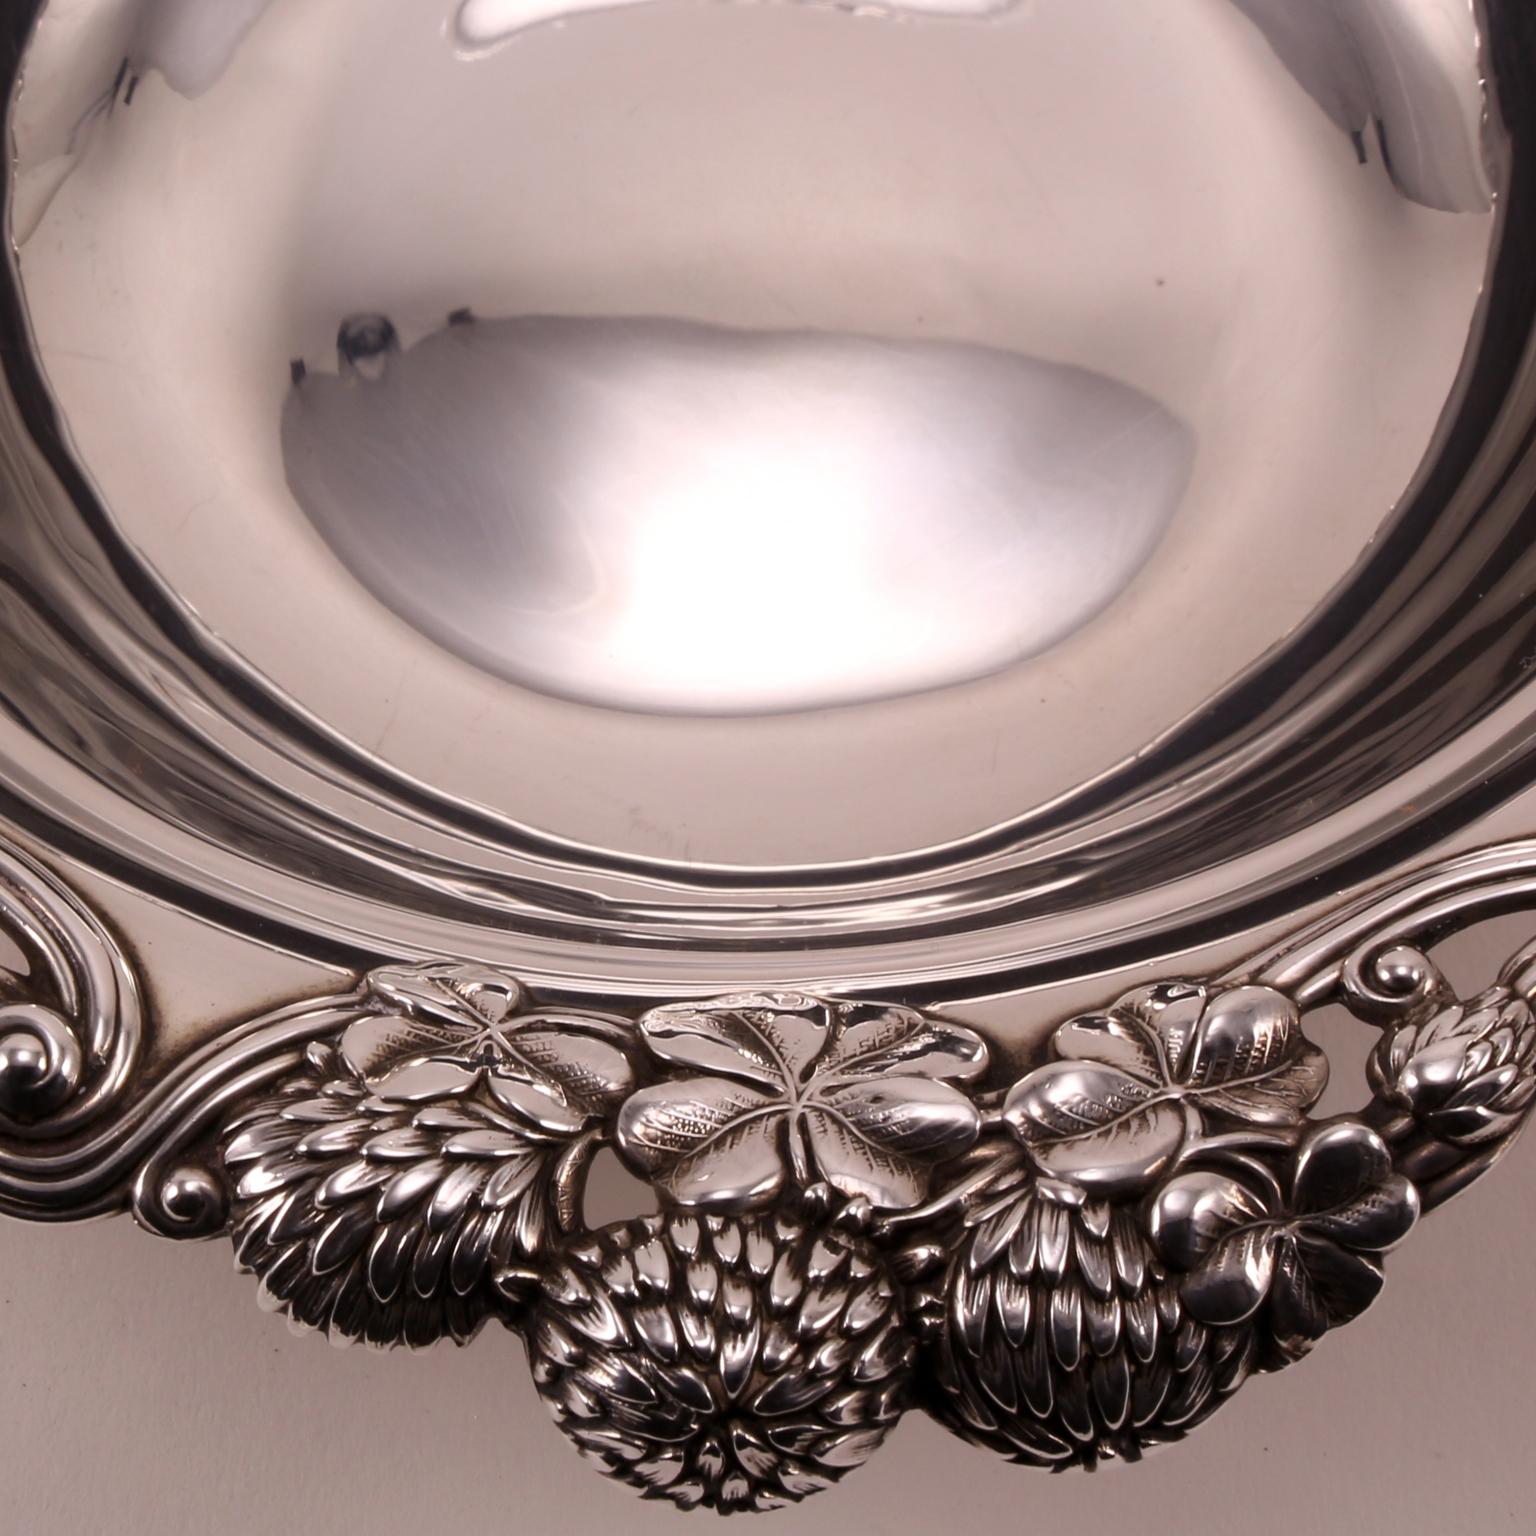 19th Century Tiffany Sterling Silver Bowl Decorated with Flowers and Leaves (Sterlingsilber) im Angebot